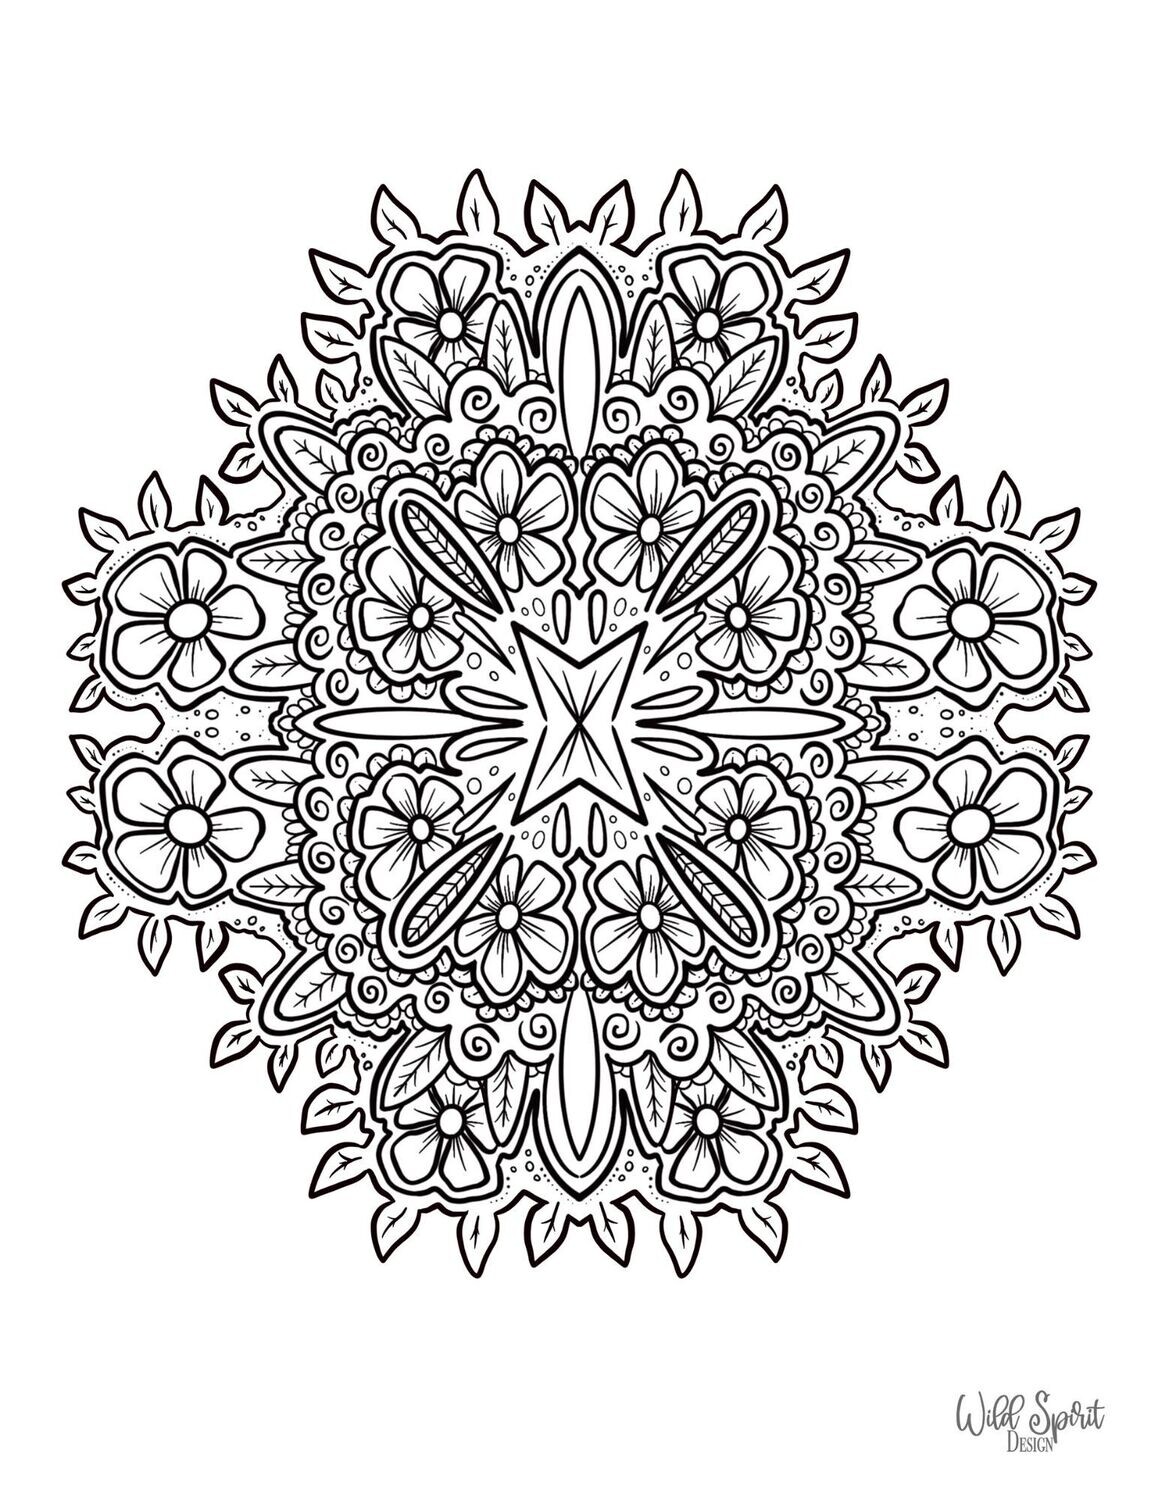 Mandala Style 6, Zen Tangle Coloring Page, Digital Download, Floral